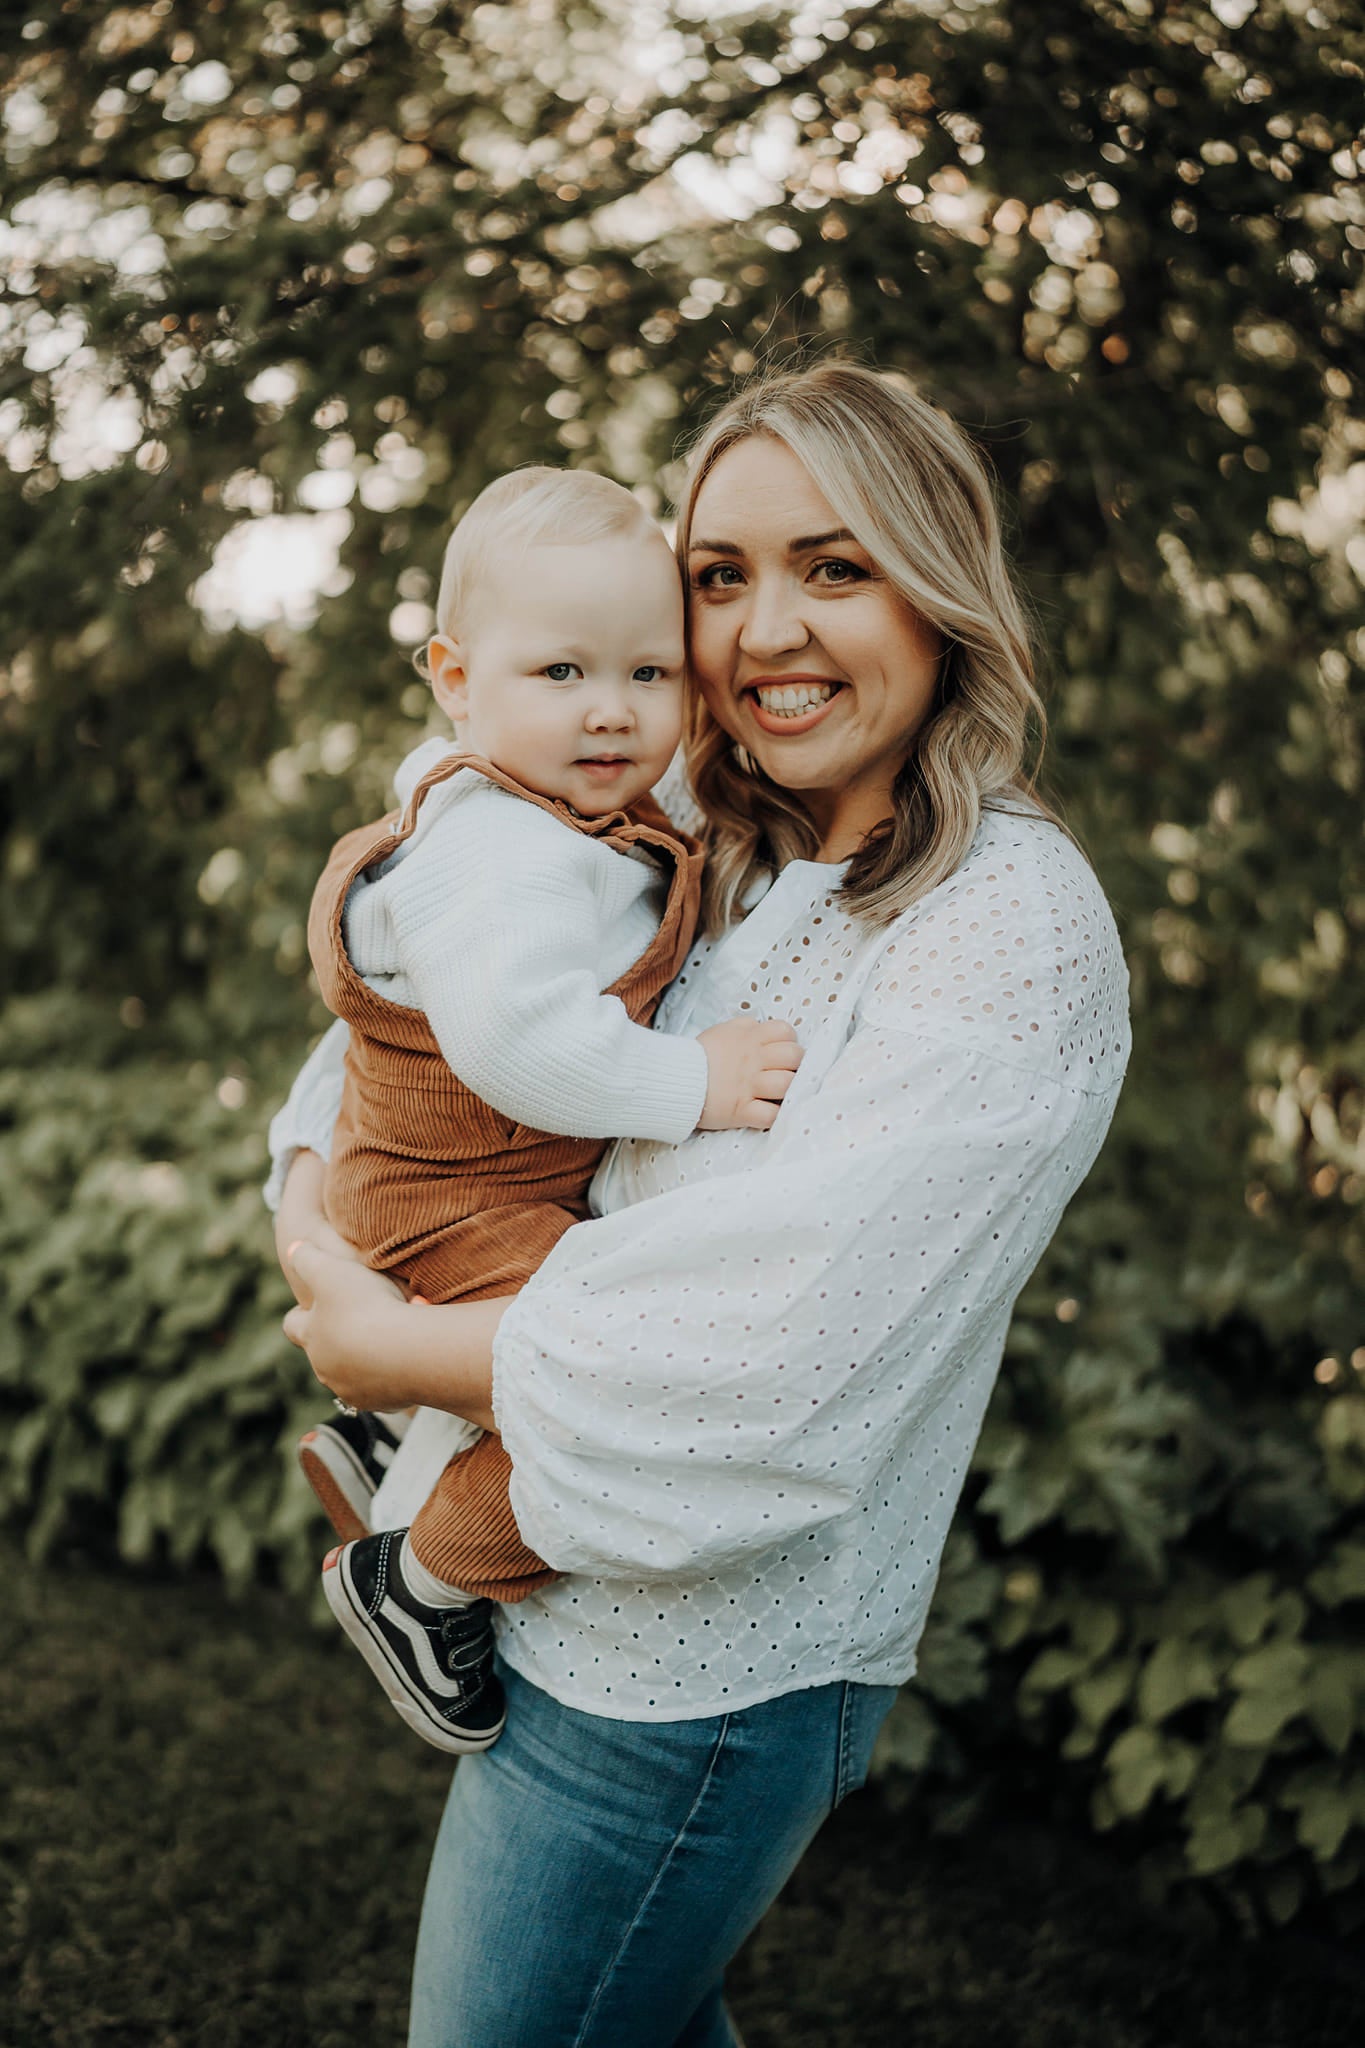 An image of Motherhood Milestones founder, Emily Mitchell, holding her son. Both are looking and smiling at the camera. Emily is wearing a white long sleeve shirt and jeans and her son is in brown overalls and a white jumper. They are outside at sunset in front of trees. 